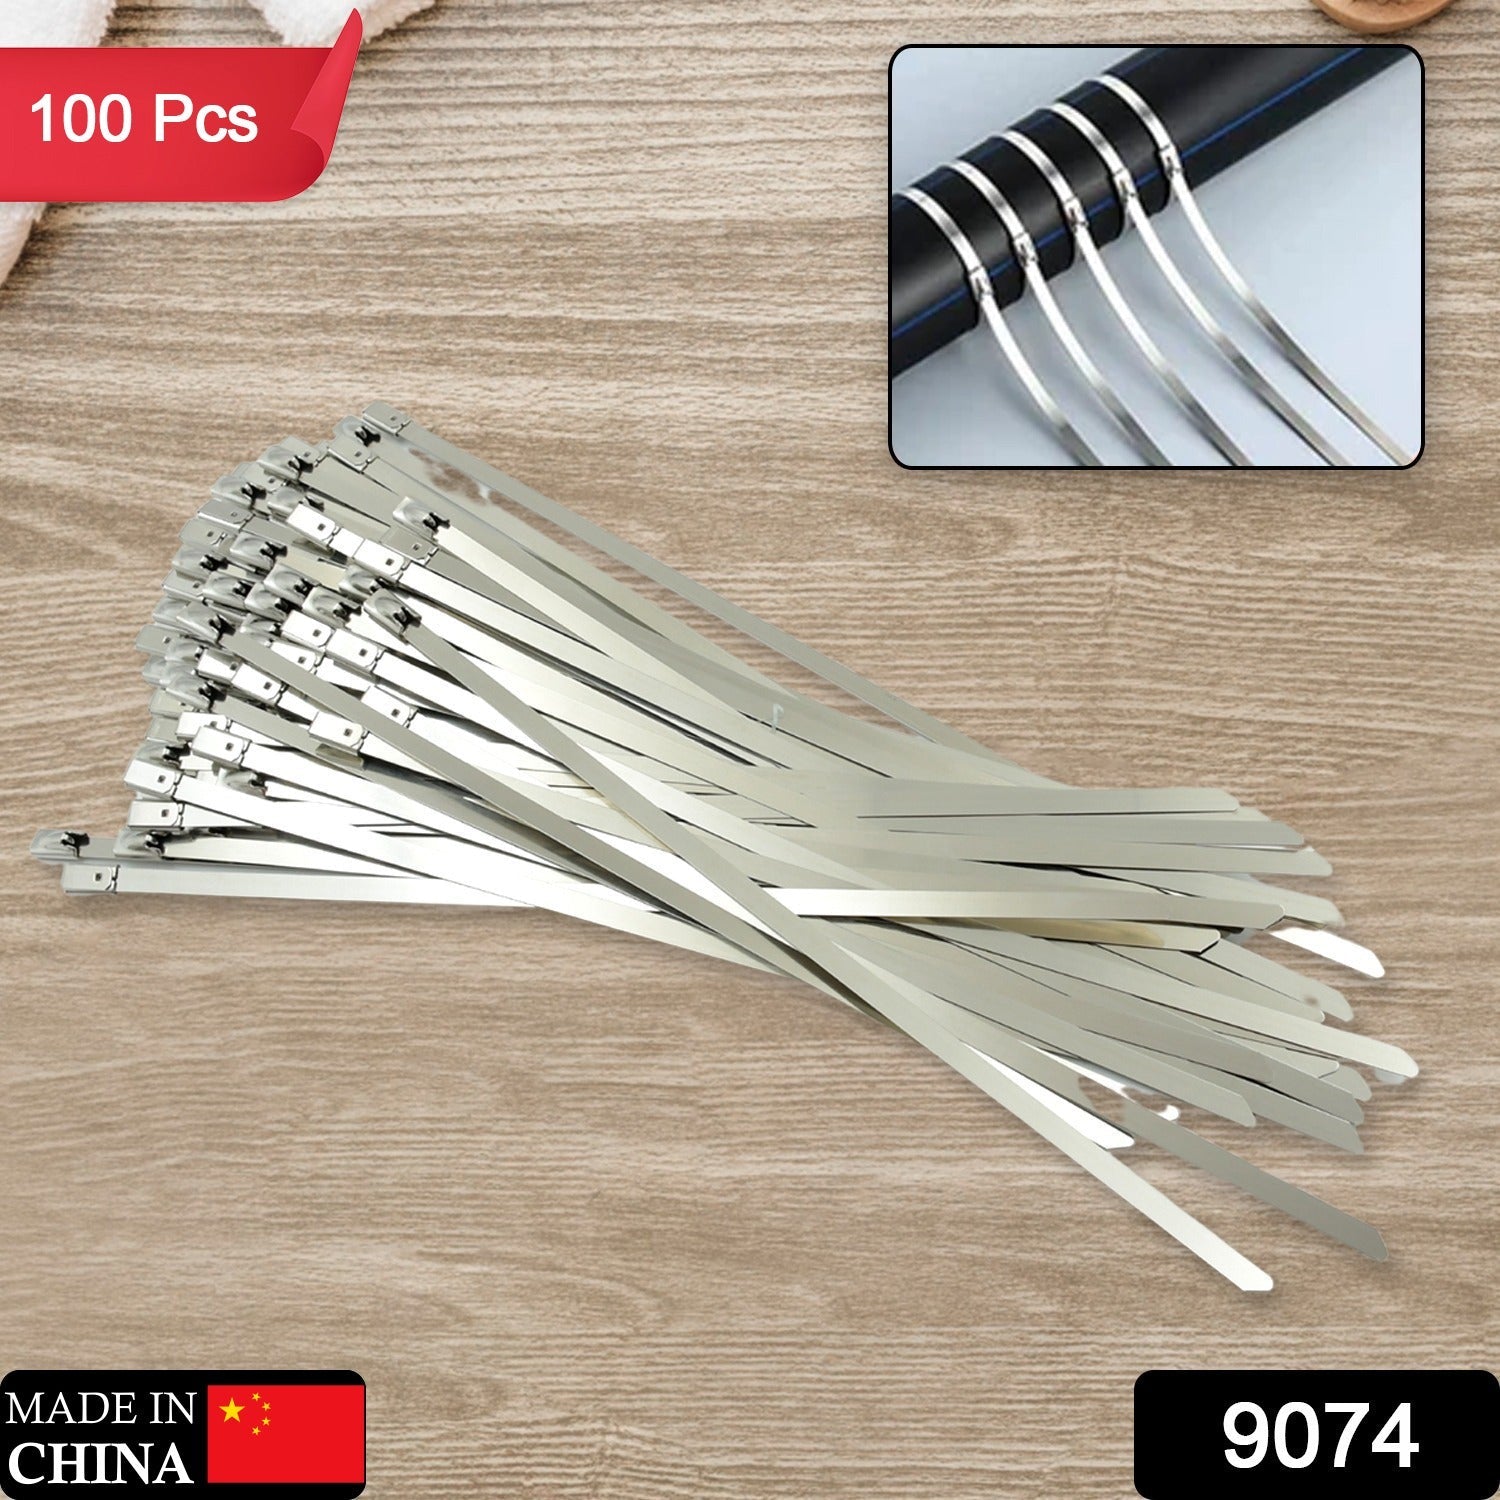 9074 Stainless Steel Cable TIE Used for Solar, Industrial and Home Improvement Multipurpose HIGH Strength, Self-Locking Zip Ties, Multi-purpose Tie, Portable Rustproof 100Pcs Wide Application Zip Tie Set for Building ( 4.6x 200MM / 100 pcs Set)